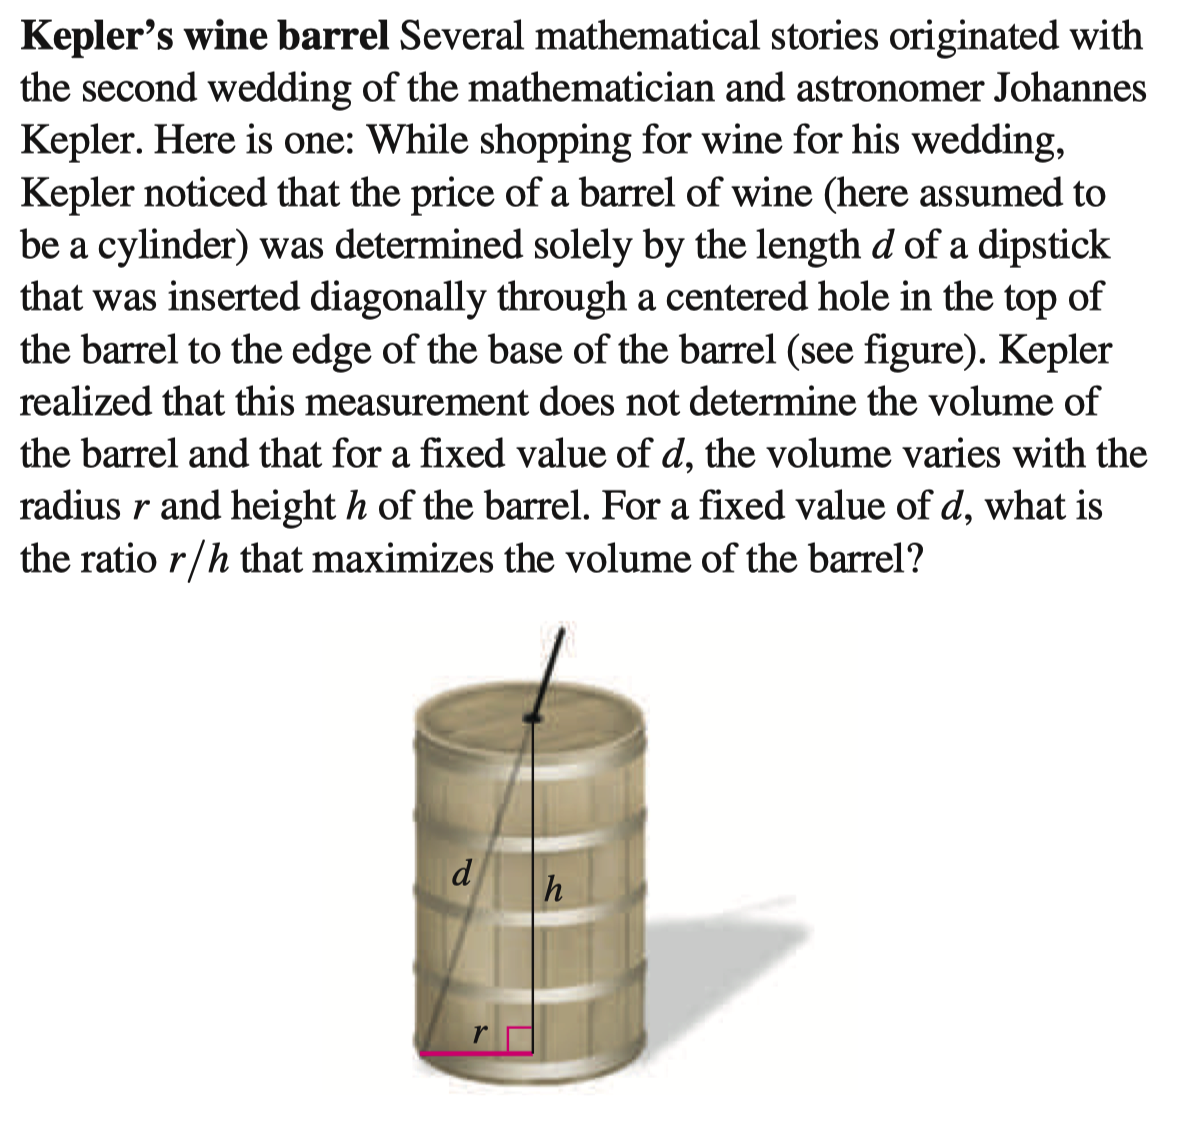 Kepler's wine barrel Several mathematical stories originated with
the second wedding of the mathematician and astronomer Johannes
Kepler. Here is one: While shopping for wine for his wedding,
Kepler noticed that the price of a barrel of wine (here assumed to
be a cylinder) was determined solely by the length d of a dipstick
that was inserted diagonally through a centered hole in the top of
the barrel to the edge of the base of the barrel (see figure). Kepler
realized that this measurement does not determine the volume of
the barrel and that for a fixed value of d, the volume varies with the
radius r and height h of the barrel. For a fixed value of d, what is
the ratio r/h that maximizes the volume of the barrel?
h
